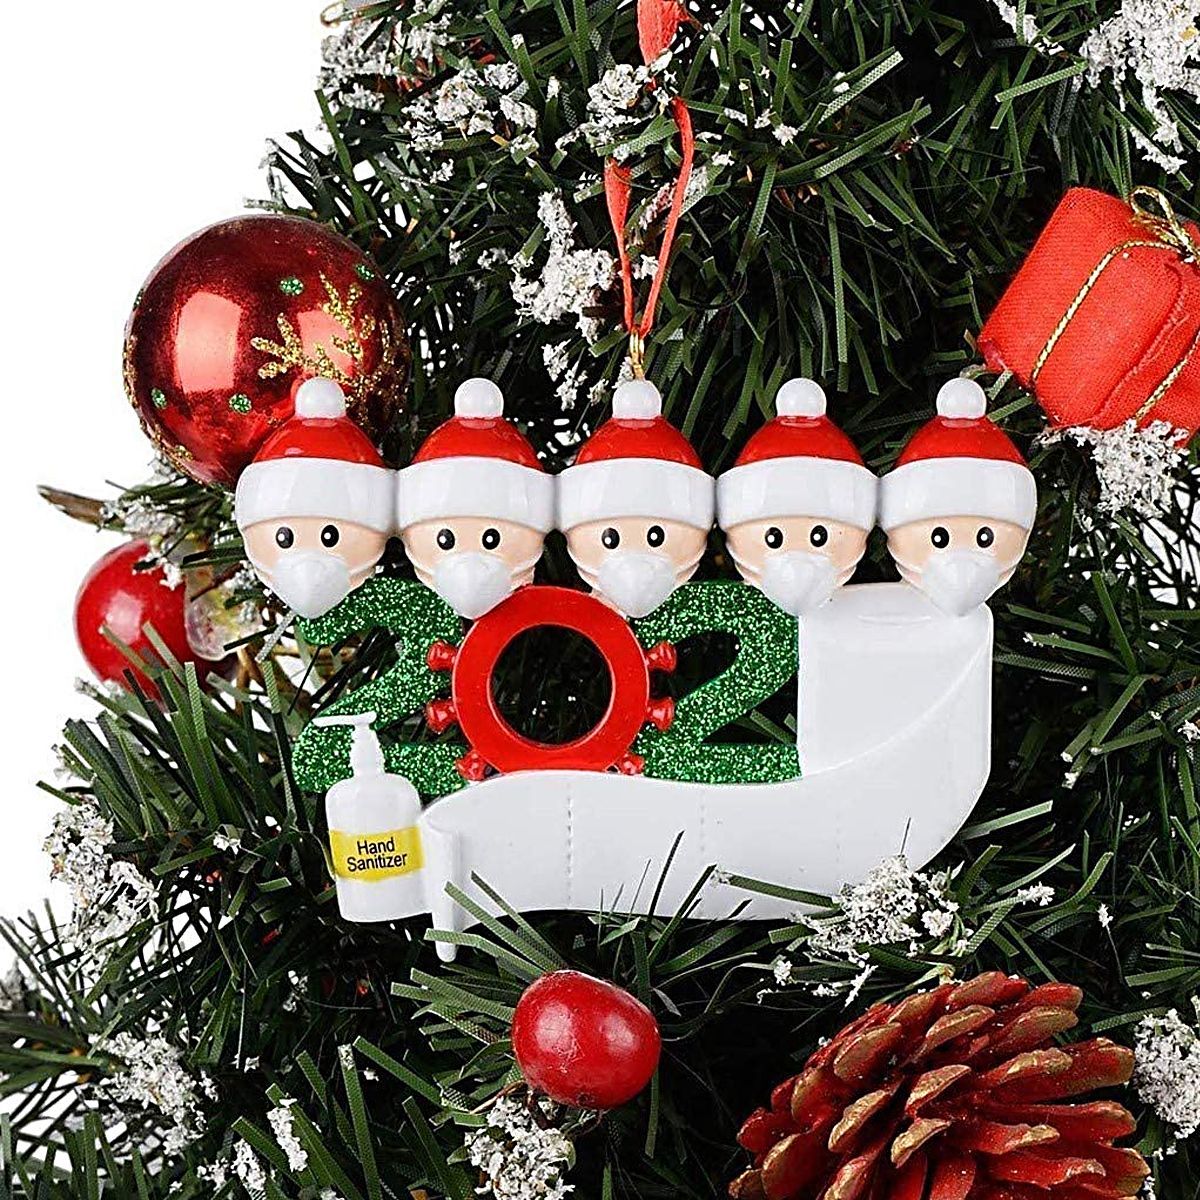 2020-Merry-Christmas-Tree-Hanging-Ornaments-Family-DIY-Personalized-Decor-Gifts-1777899